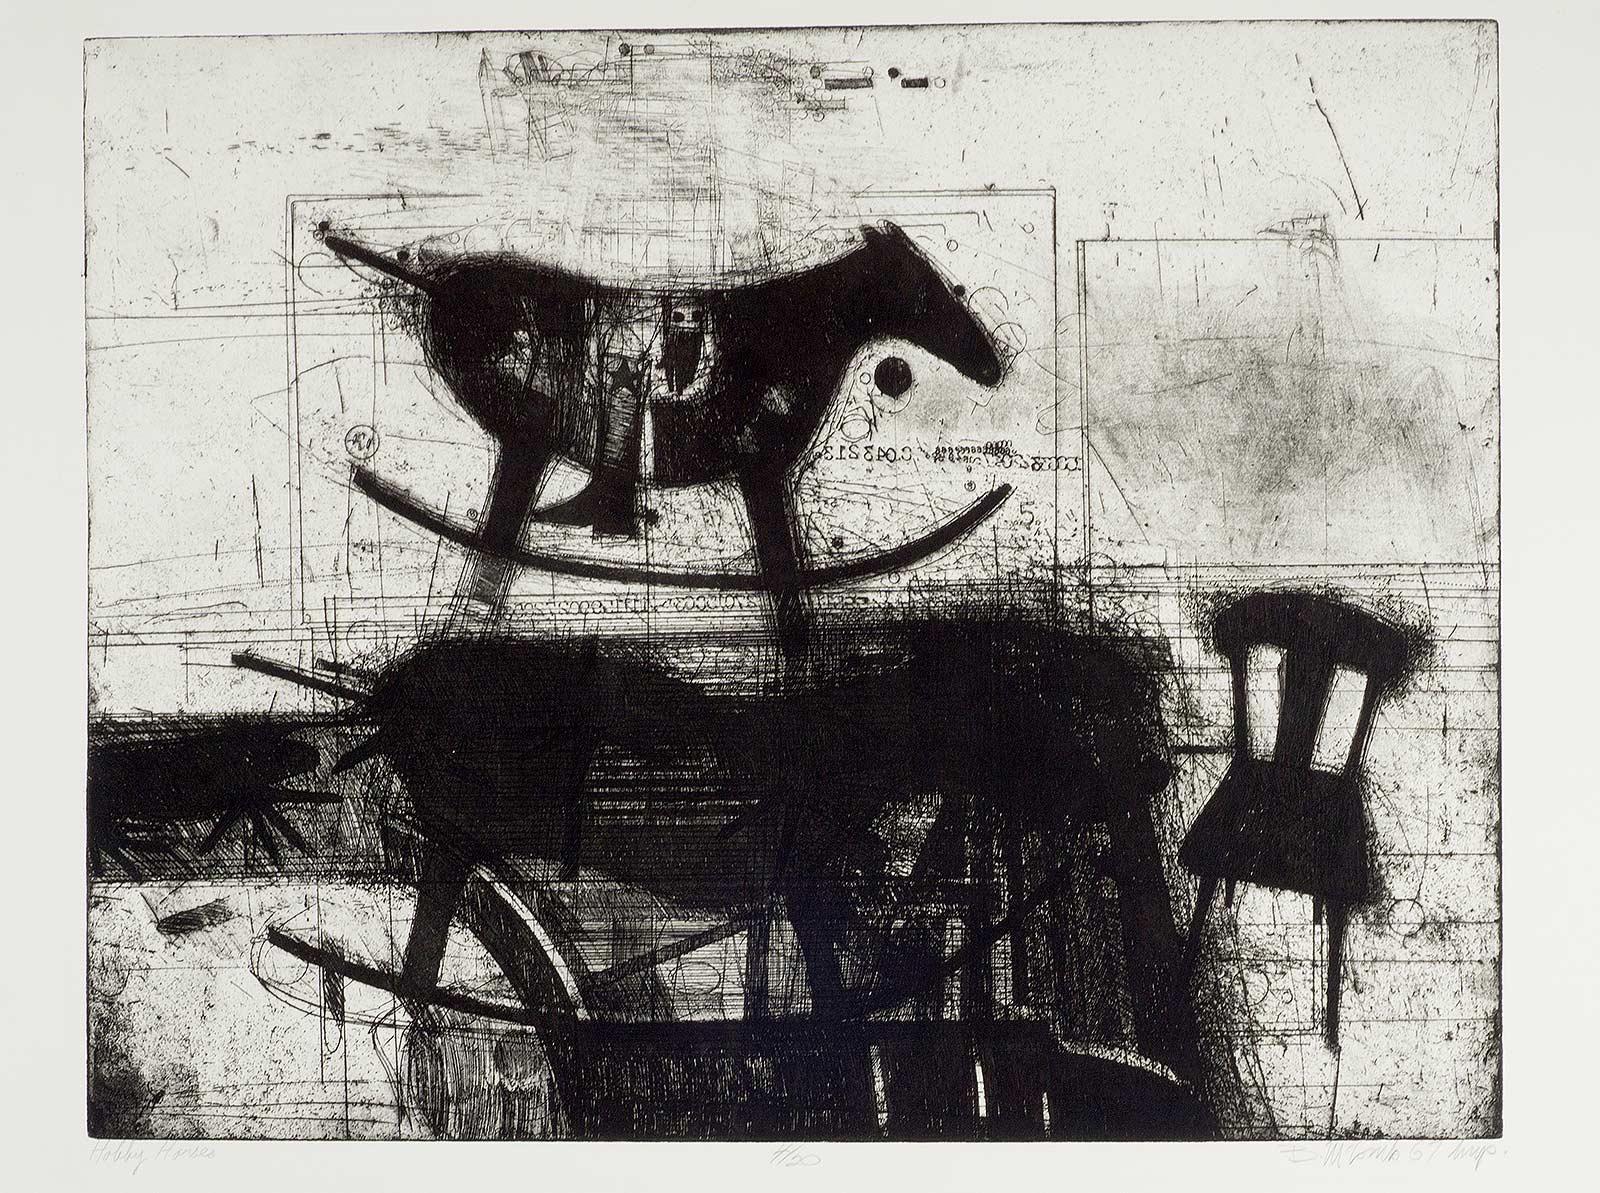 Bruce McCombs' etching and drypoint of 1967 is in the permanent collection of the Whitney Museum. This impression is #4 from an edition of only 20

Bruce McCombs (Holland, MI) is a skilled draftsmen, painter and printmaker, best known for his